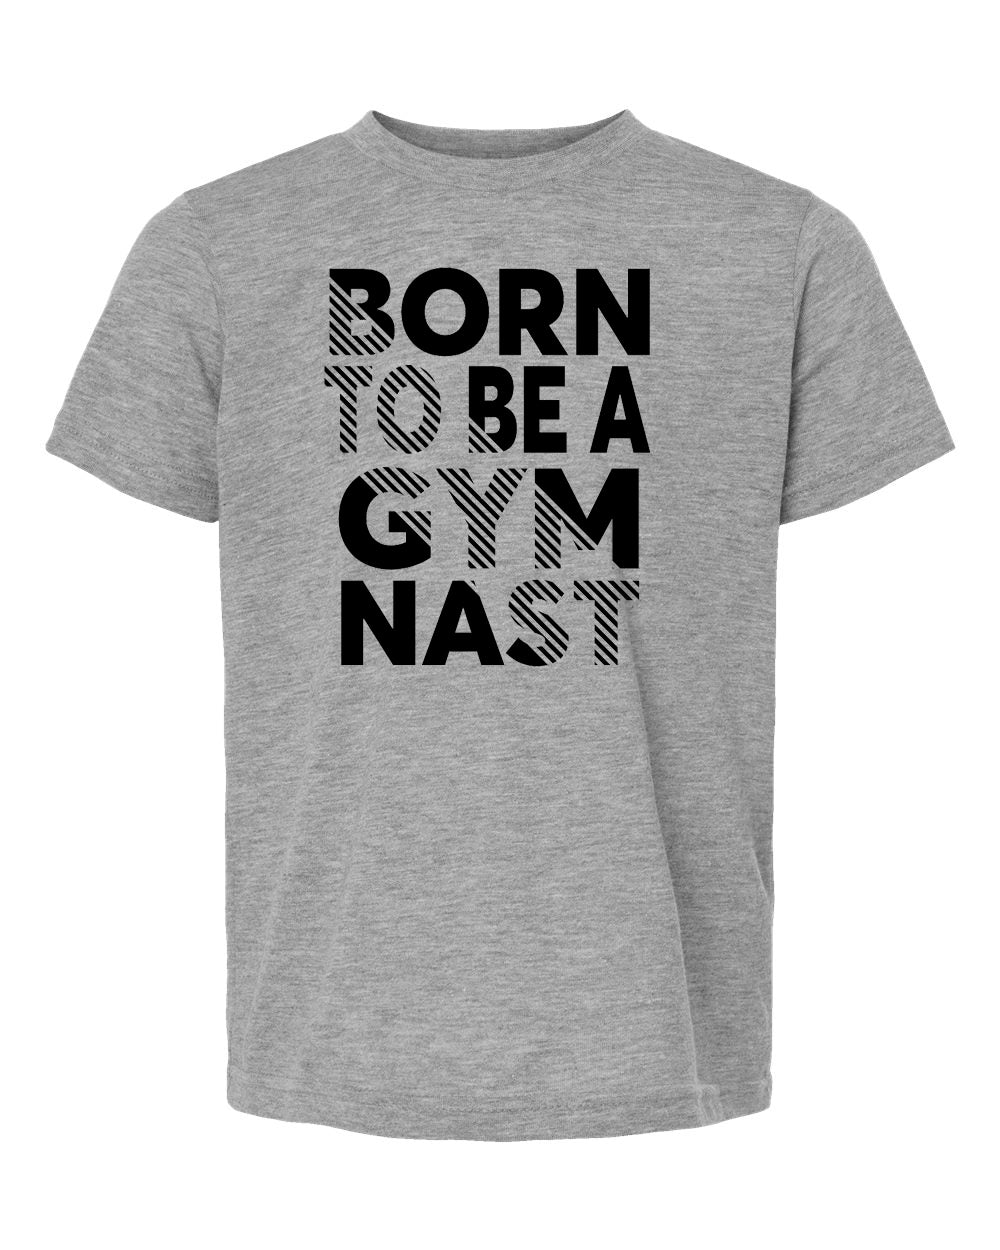 Born To Be A Gymnast Youth T-Shirt Heather Gray